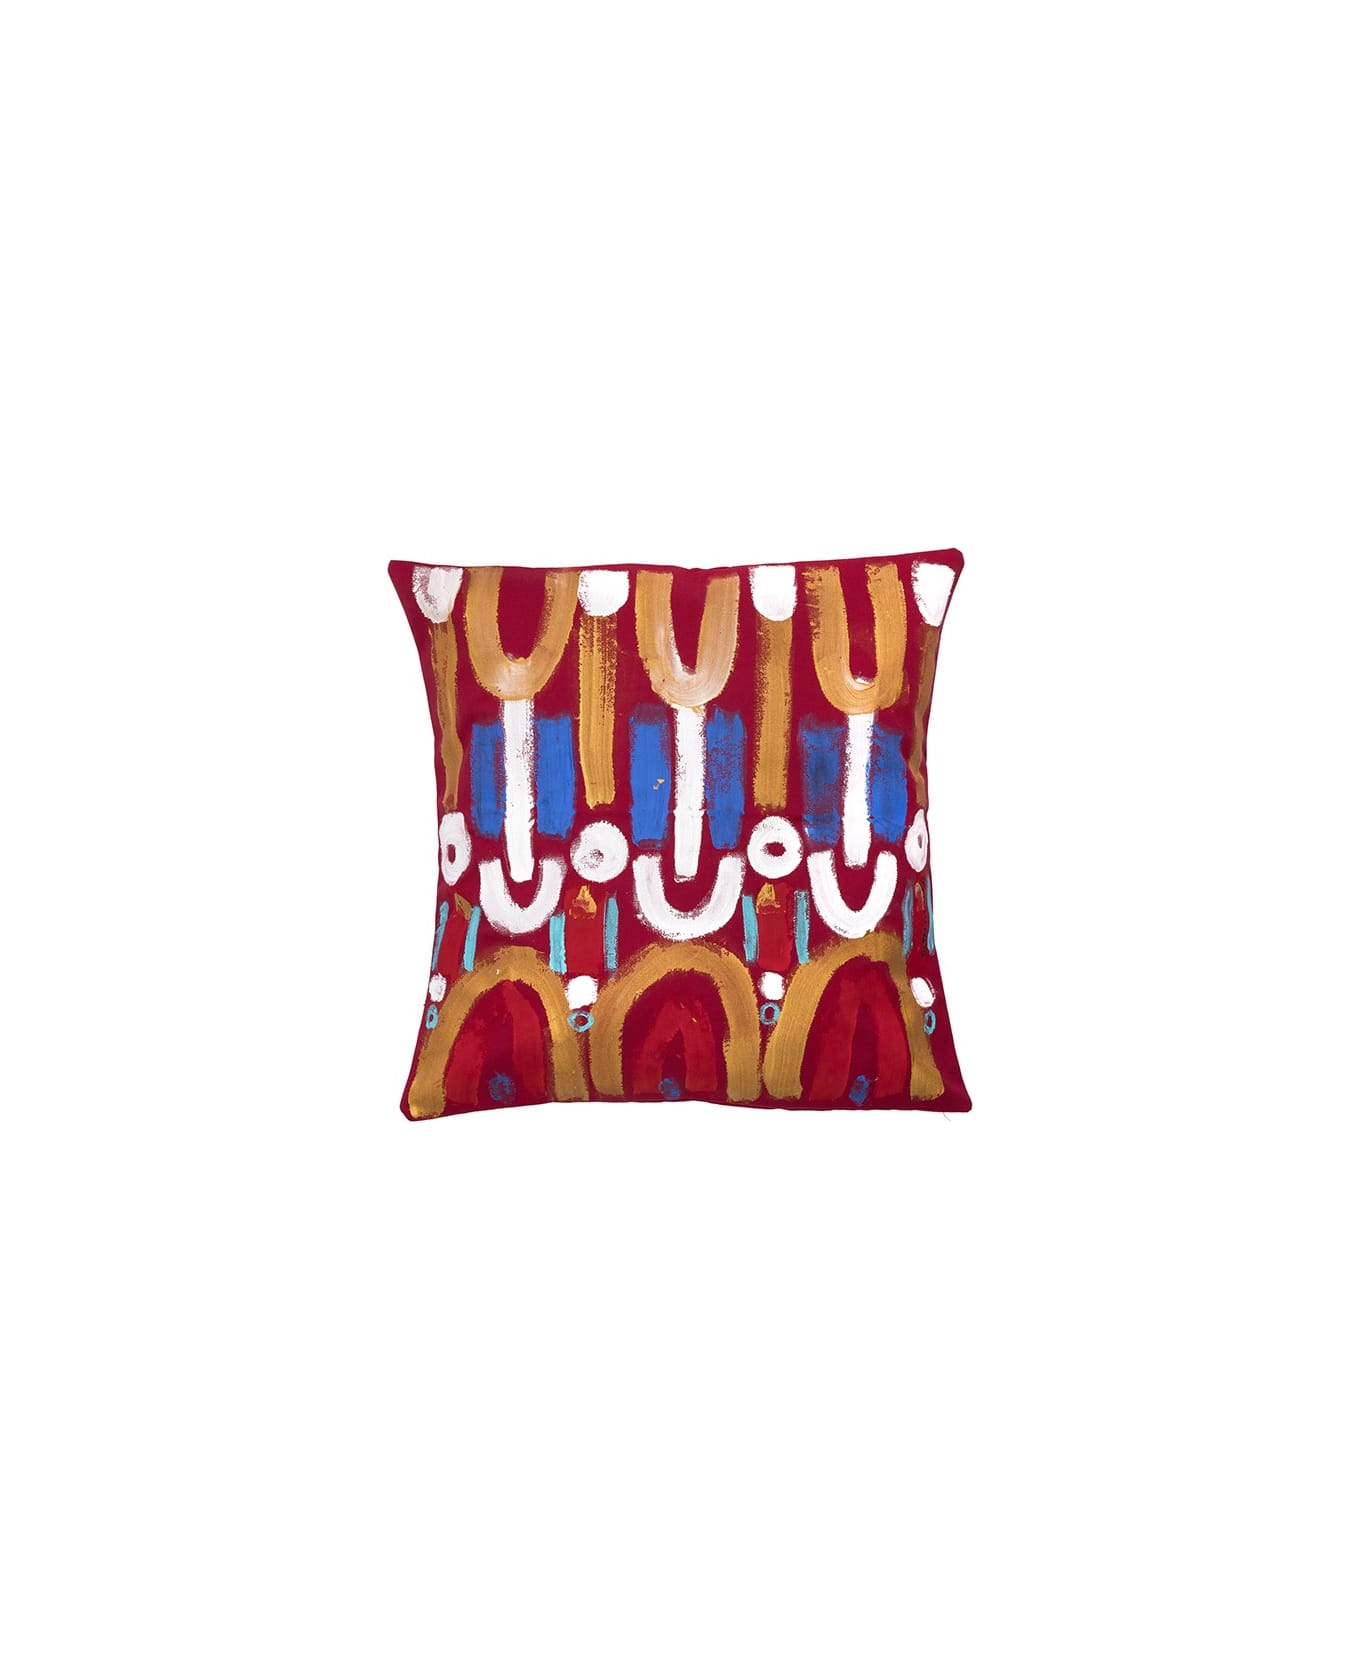 Le Botteghe su Gologone Acrylic Hand Painted Outdoor Cushion 40x40 cm - Dark Red